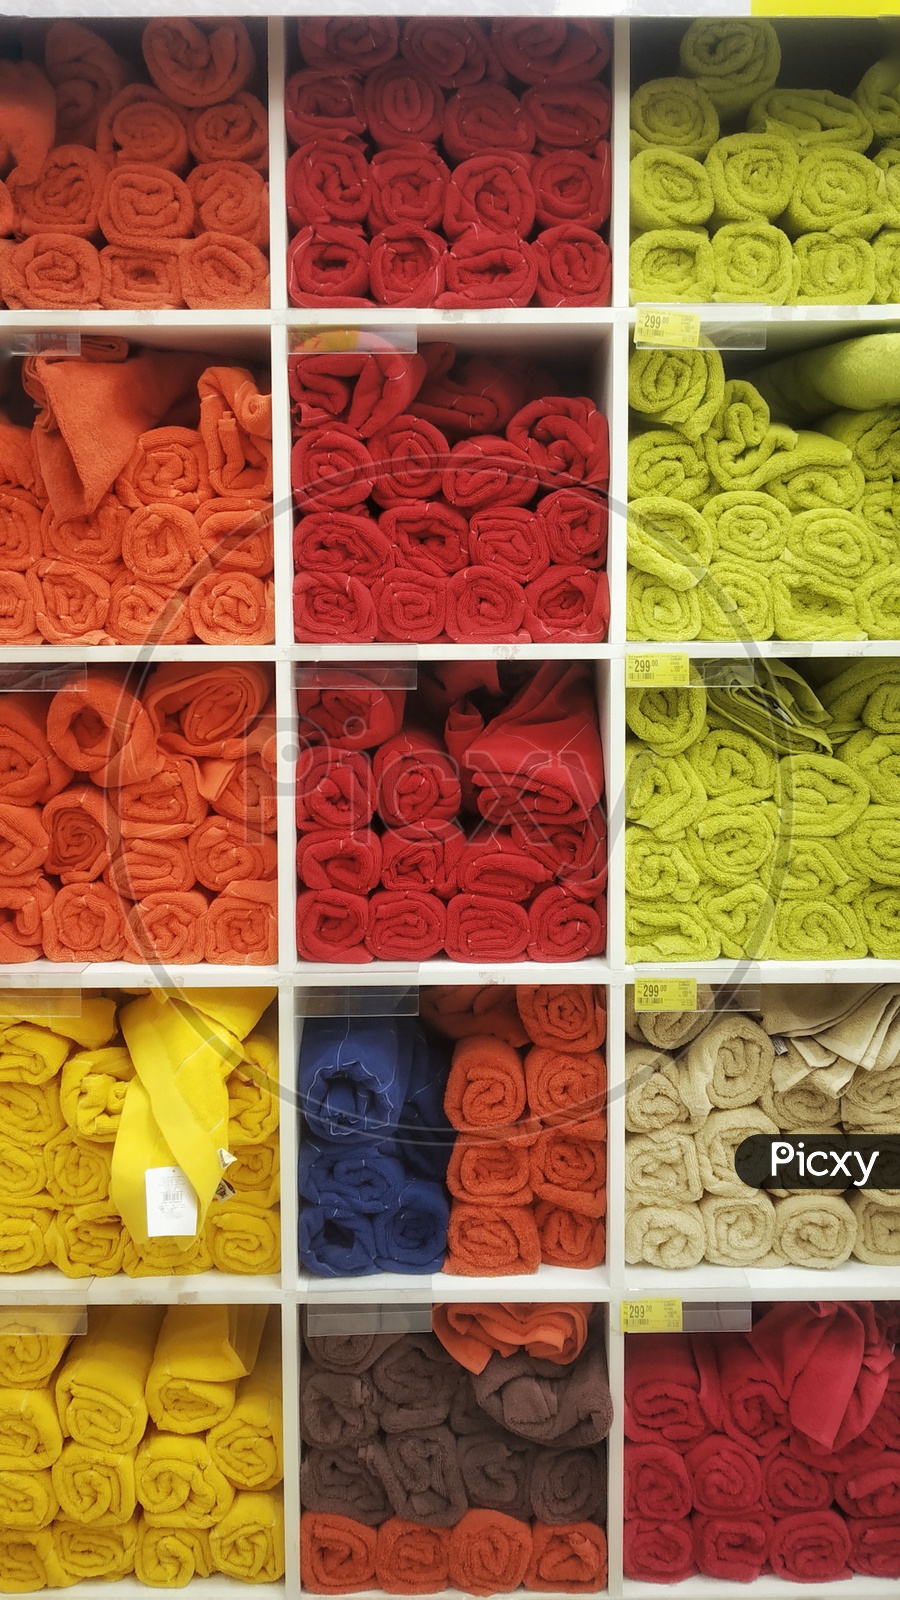 Many types of towels and textile products for sale in supermarket